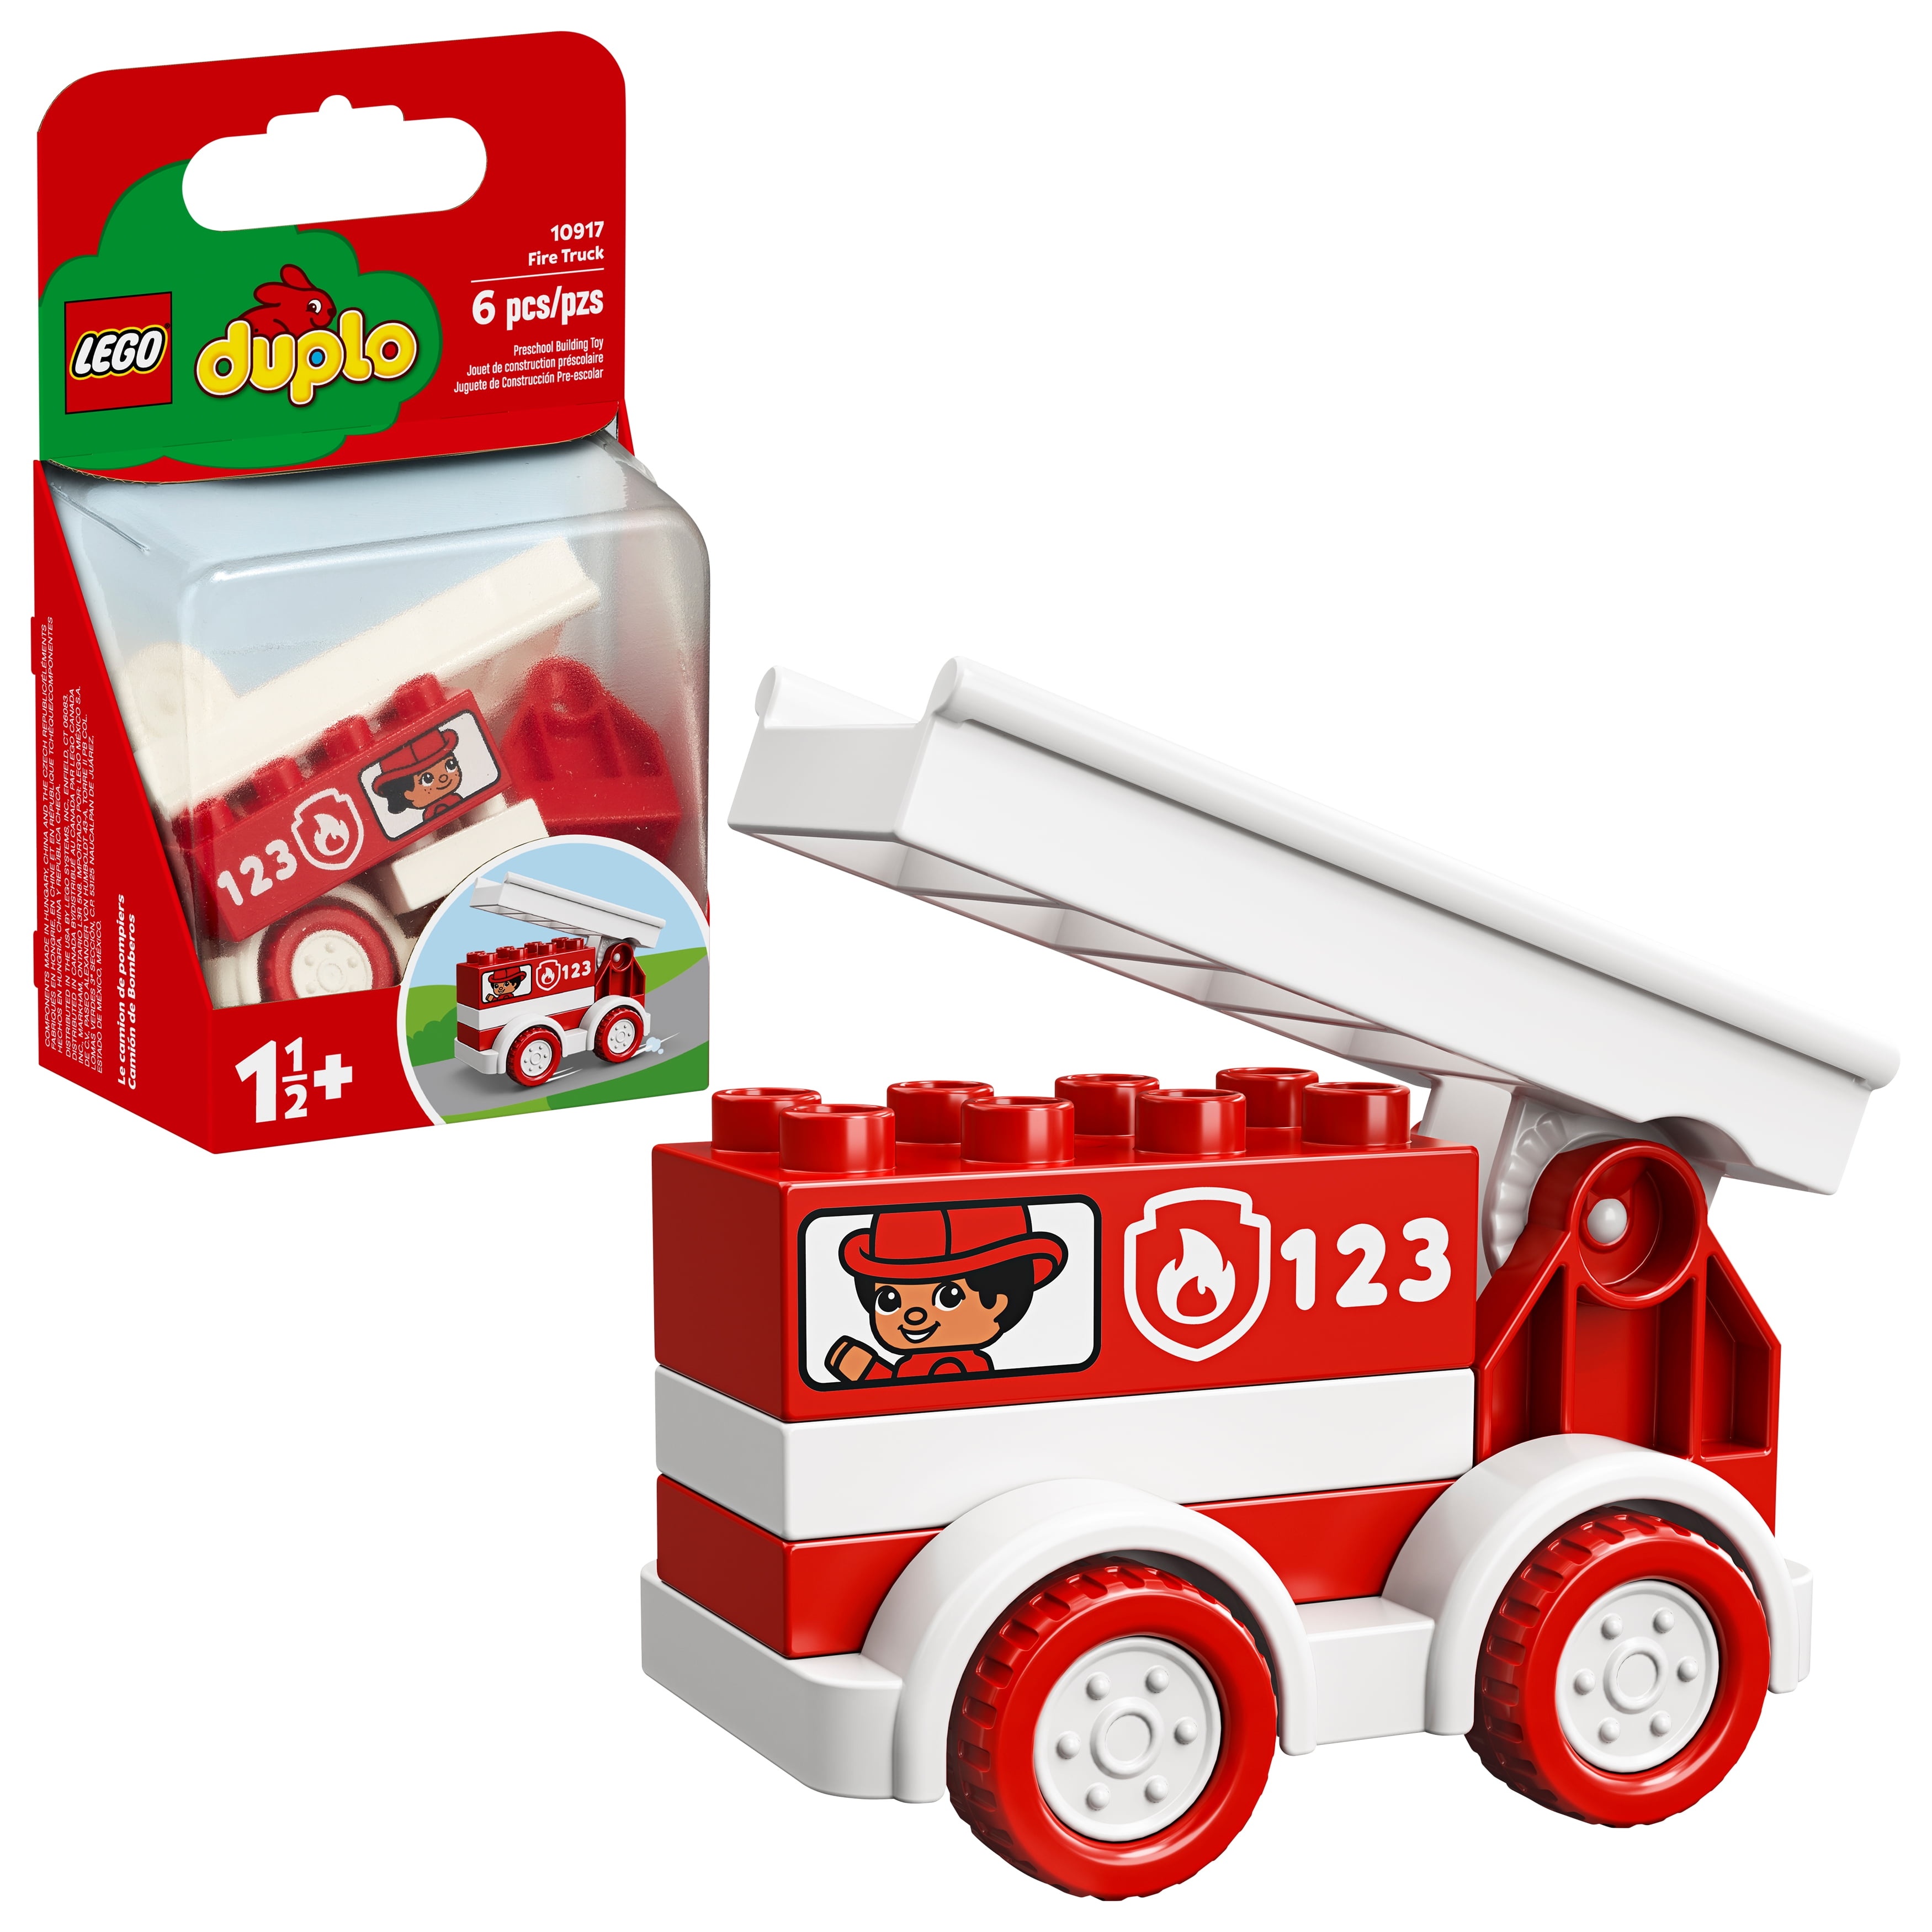 10917 LEGO DUPLO Creative Play Fire Truck 6 Pieces Age 1½ Years+ 